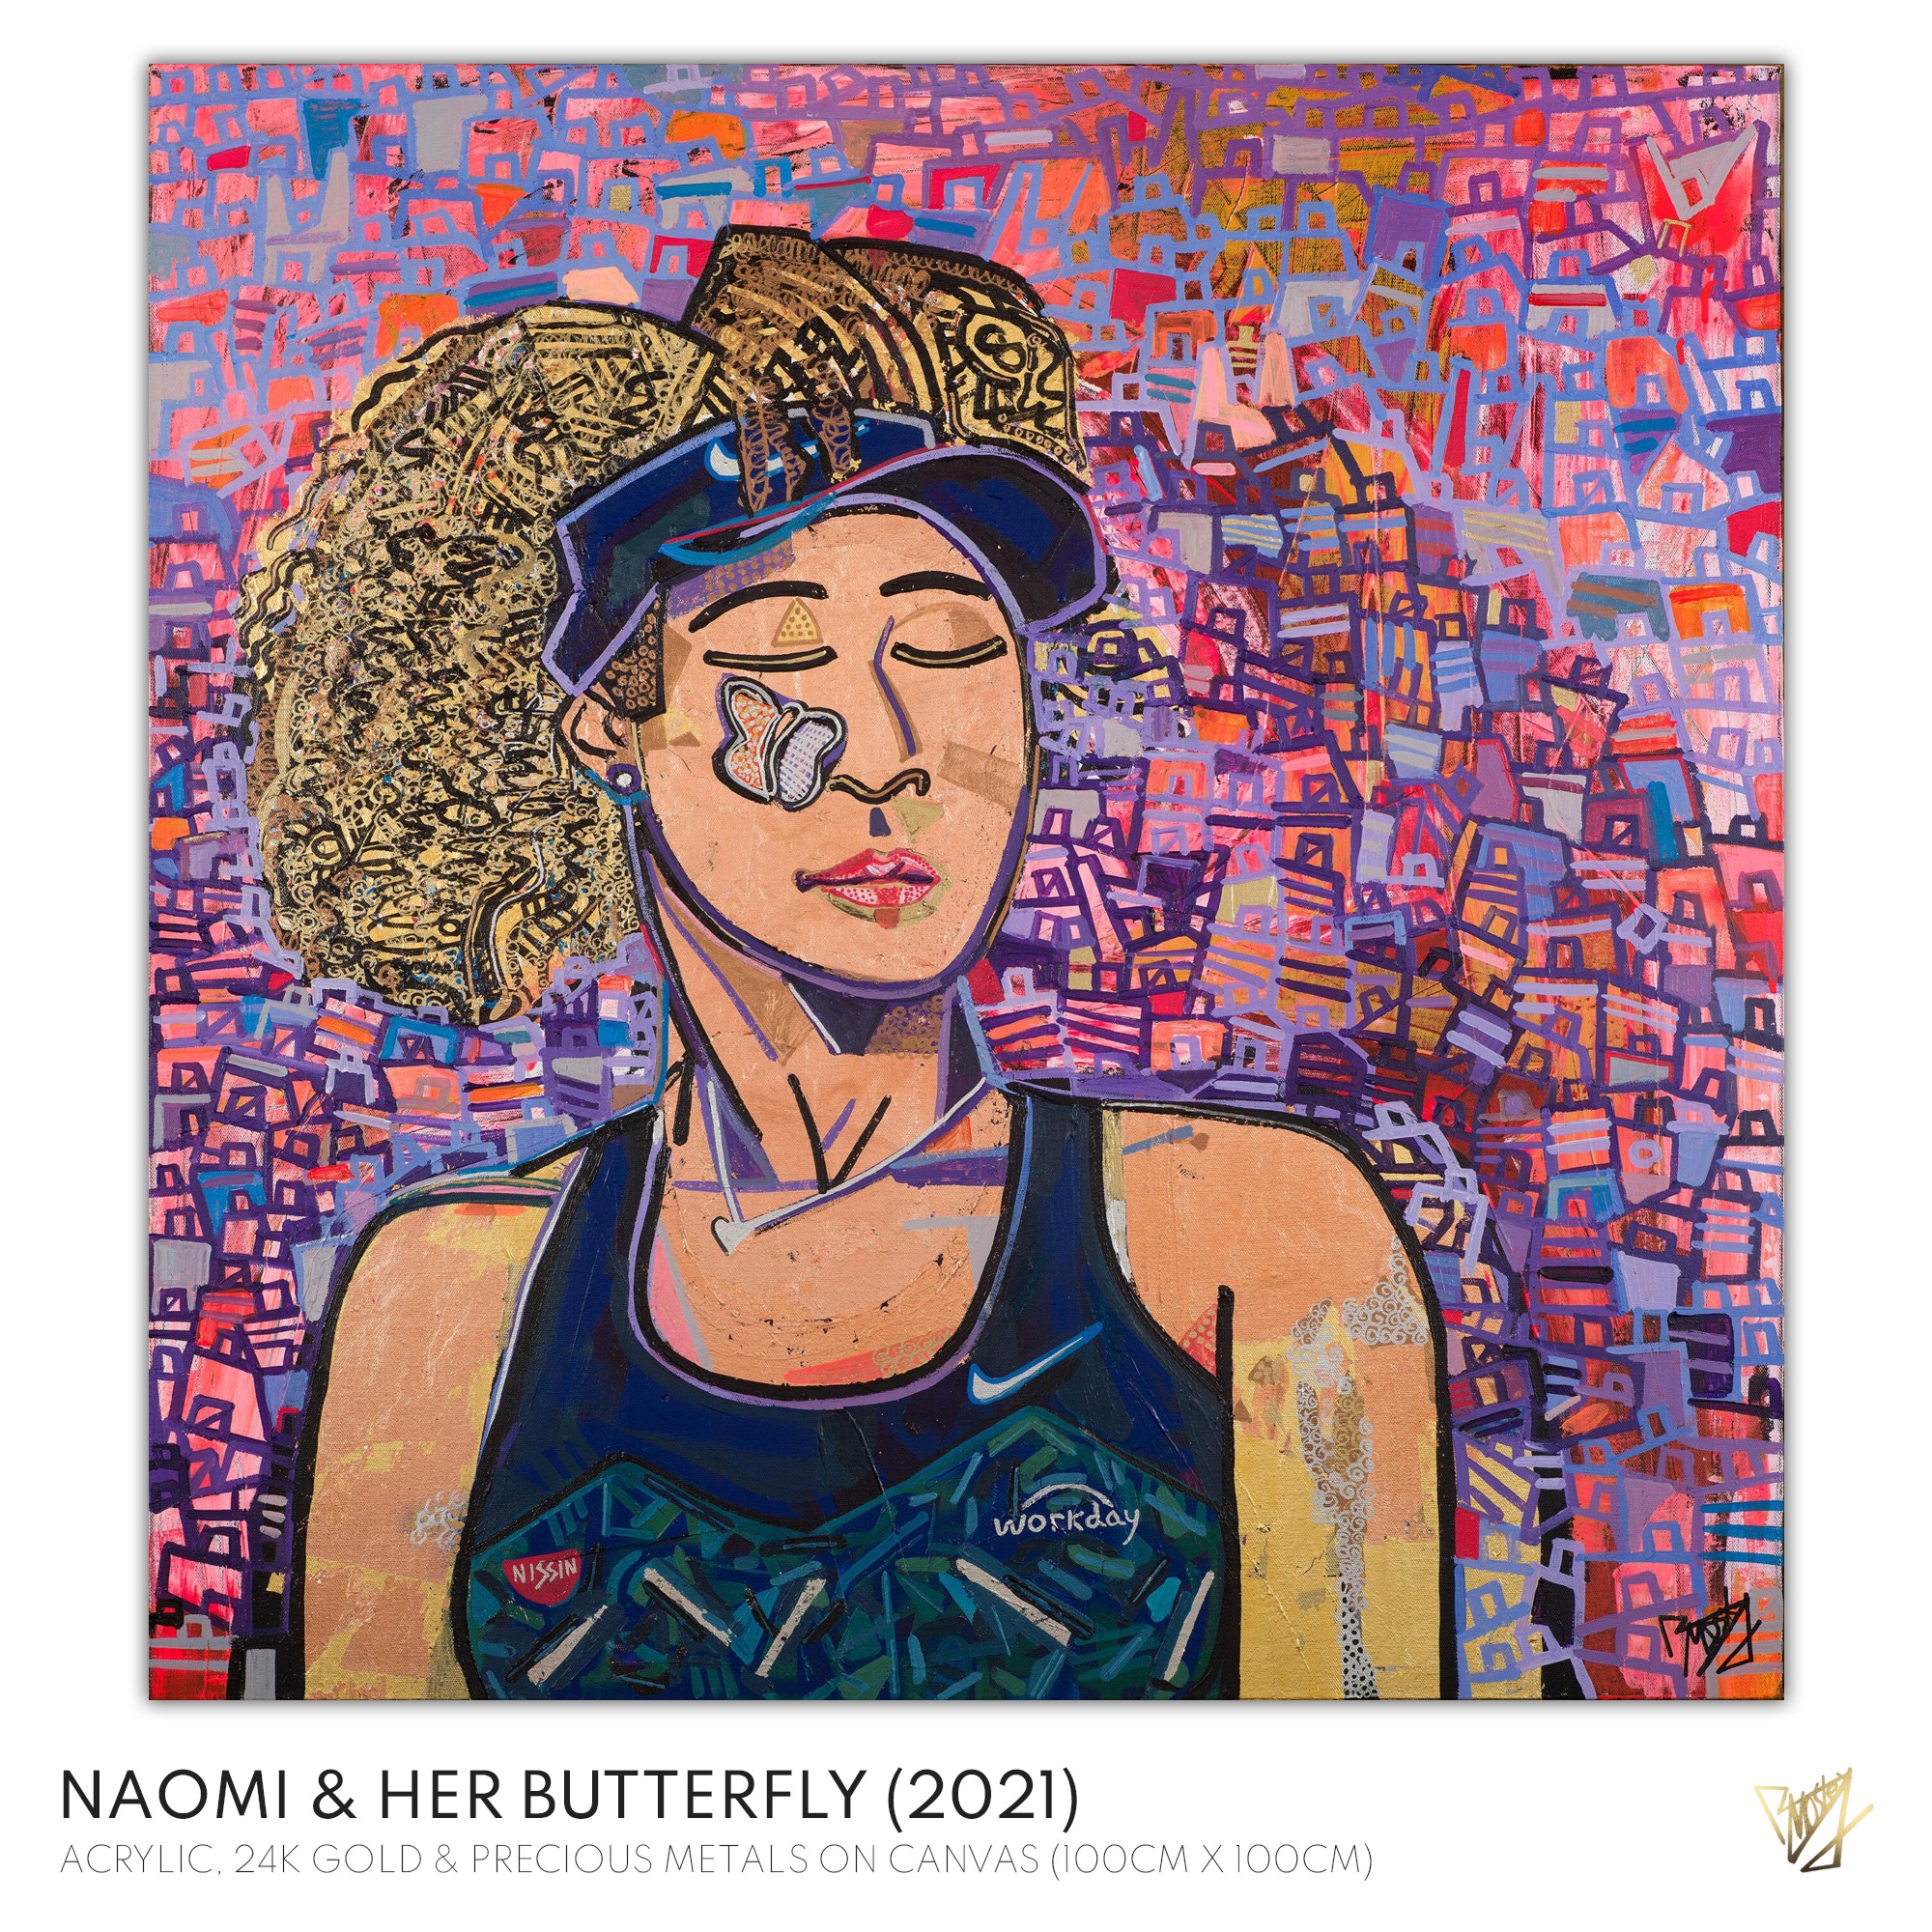 Naomi & Her Butterfly